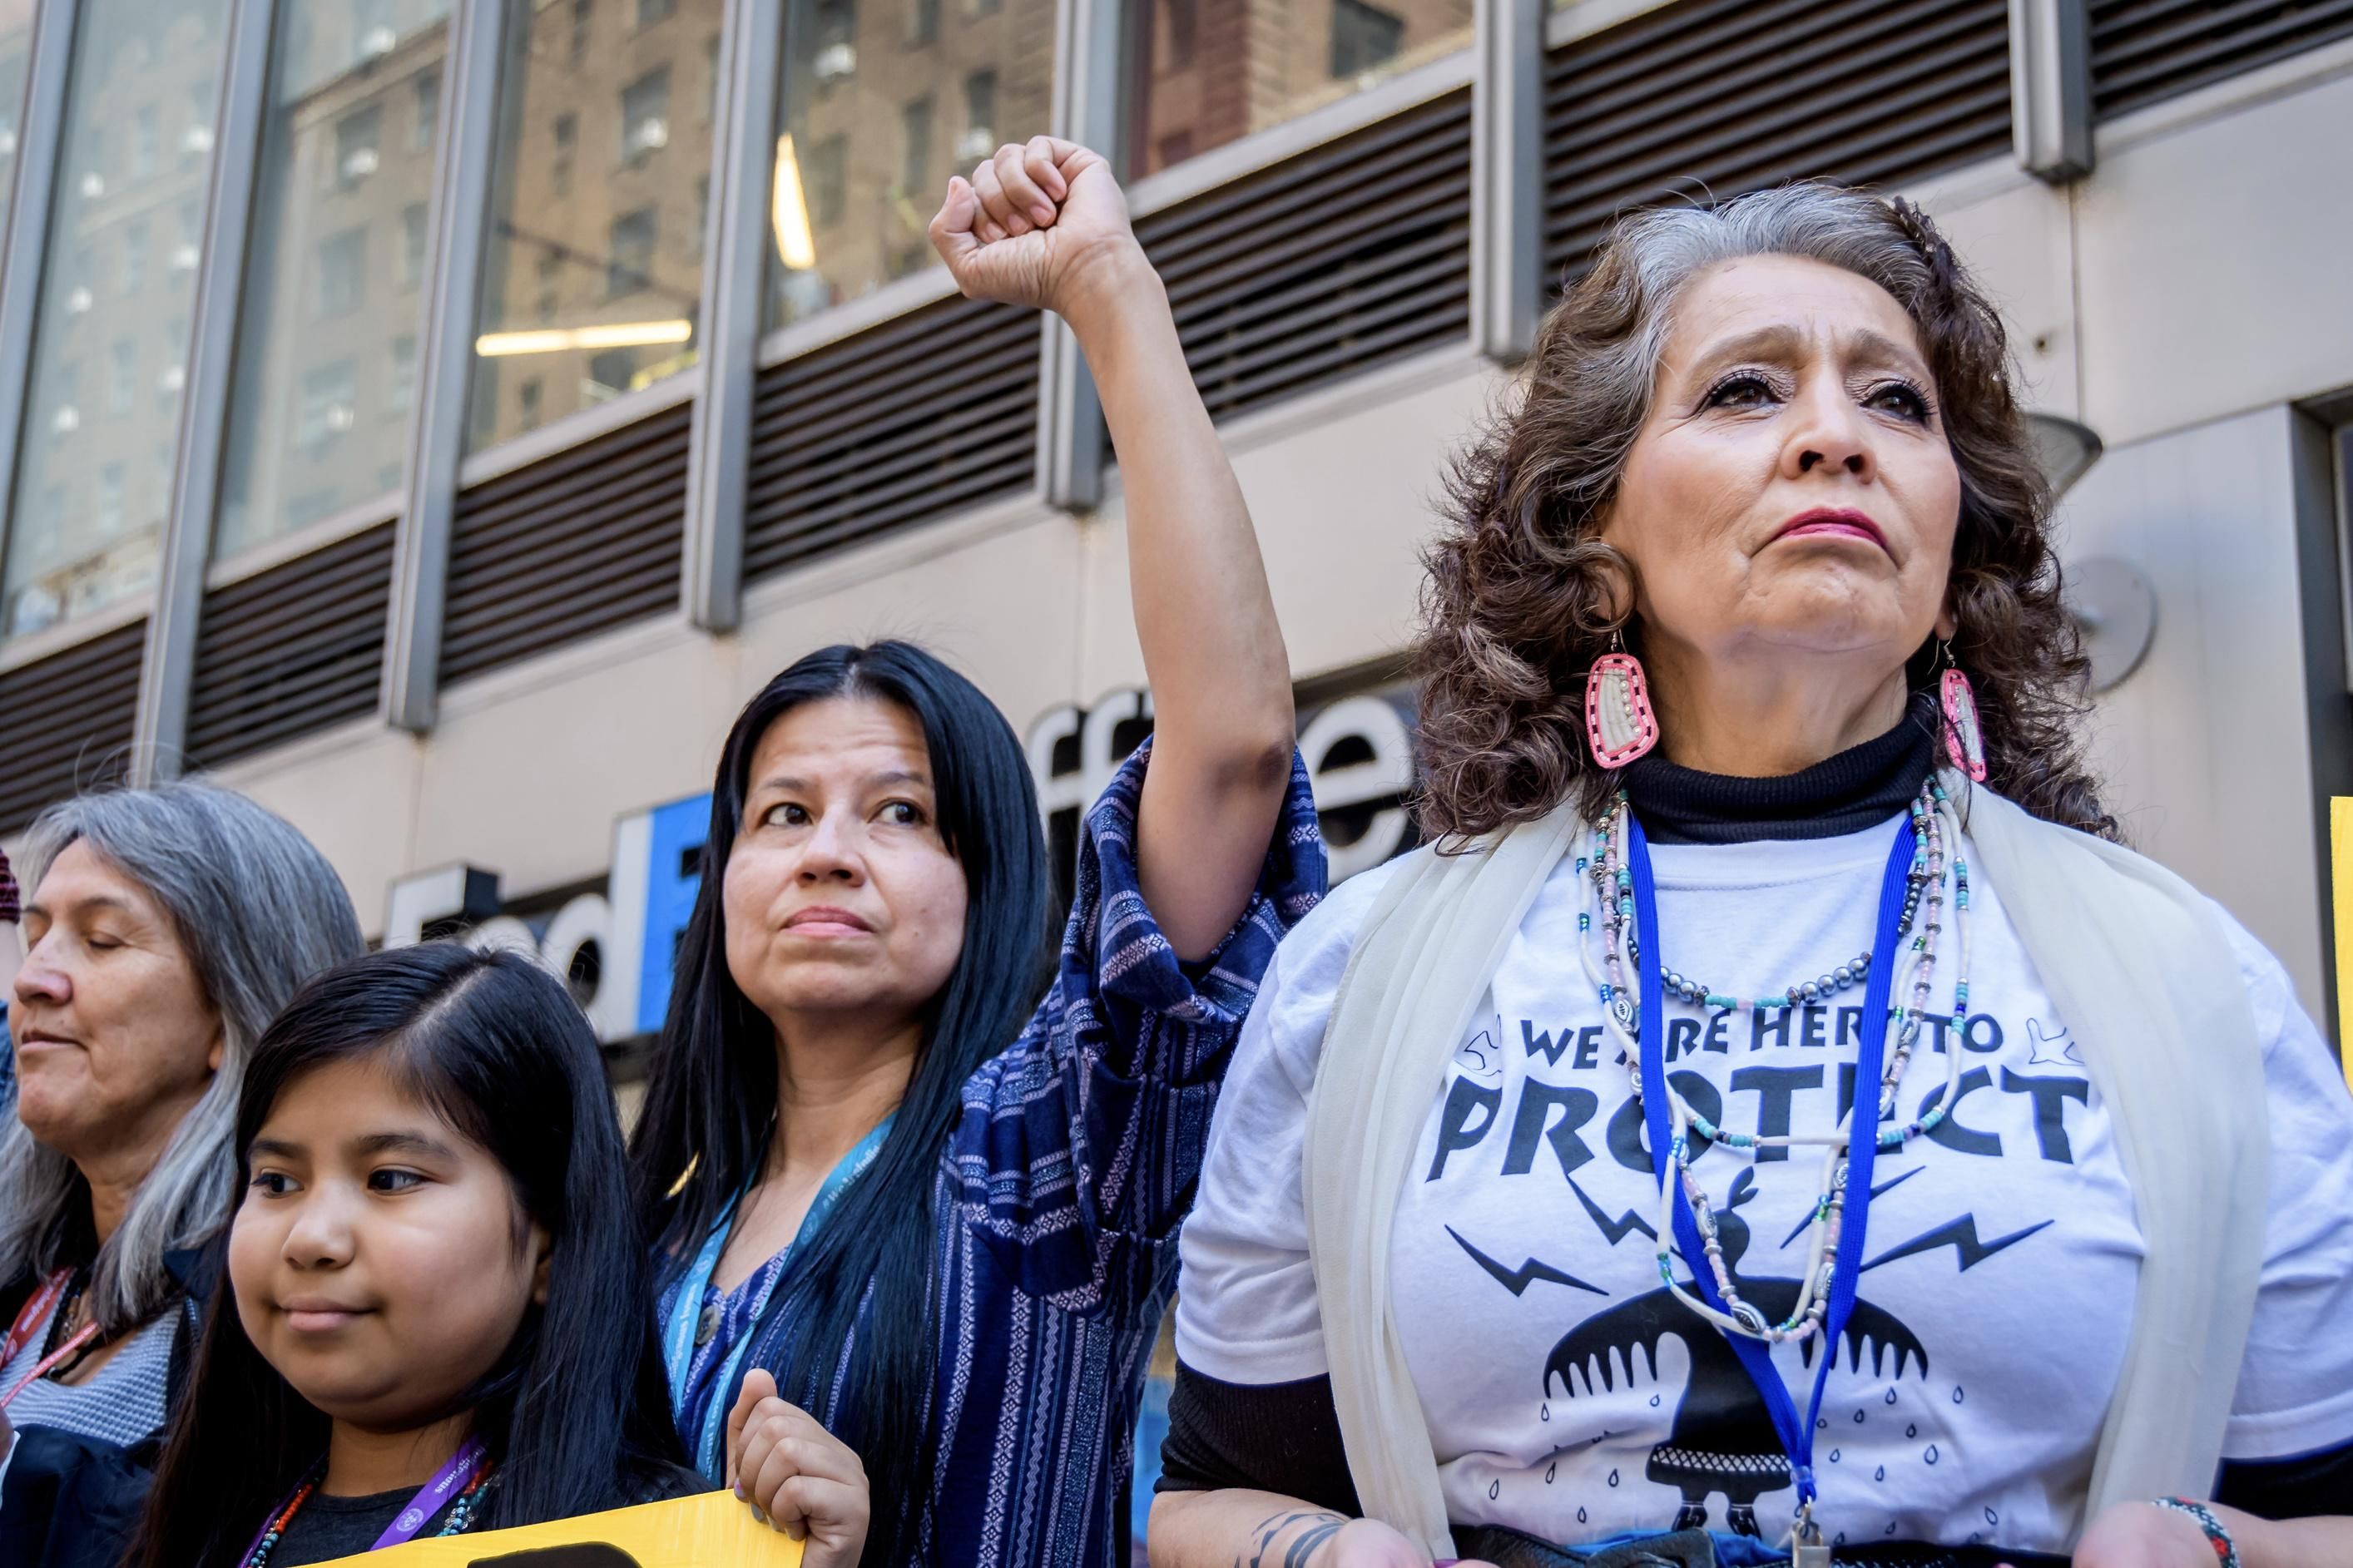 LaDonna Brave Bull Allard, Water Protector, and a member of the Standing Rock Sioux Tribe in North Dakota and South Dakota. Indigenous leaders from Brazil and allies held a non violent direct action outside the Permanent Mission of Brazil in New York City on April 23, 2019 to raise their voices and show solidarity with the indigenous resistance. (Photo: Erik McGregor/LightRocket via Getty Images)